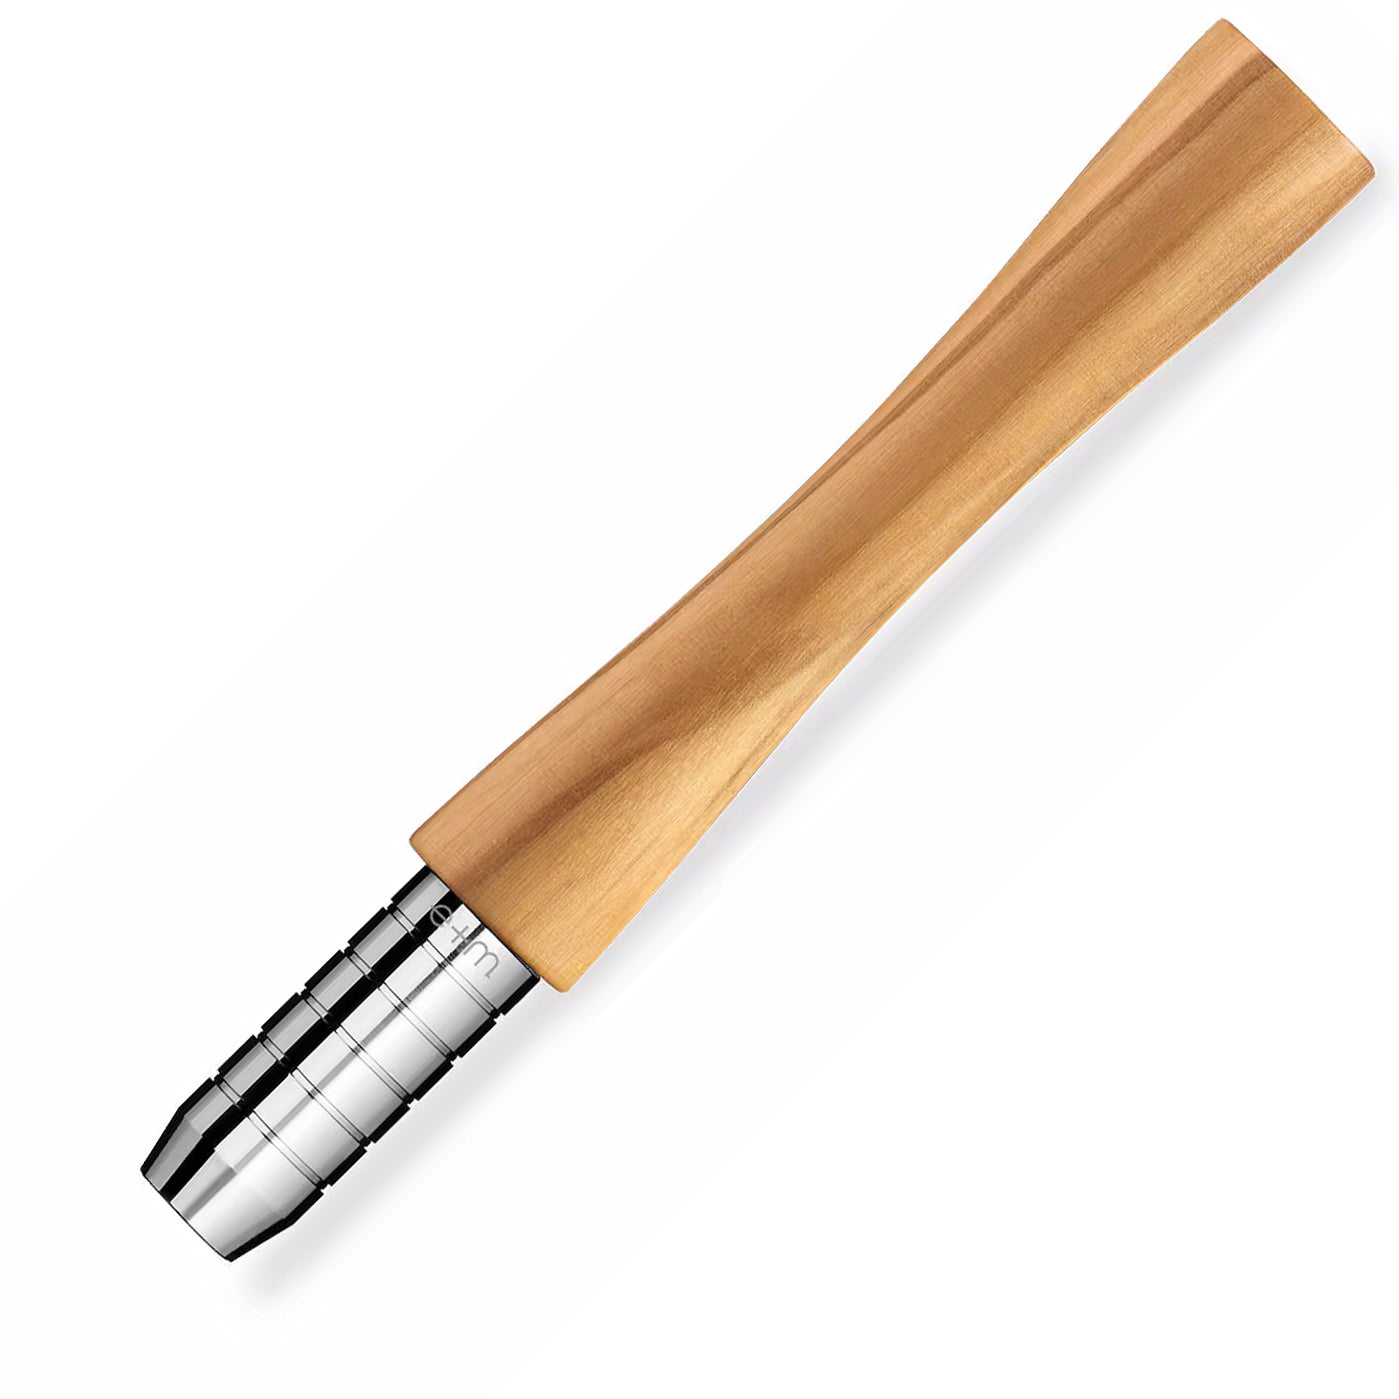 e+m Holzprodukte MOTUS + Pencil Extender with pencils - Olive Wood